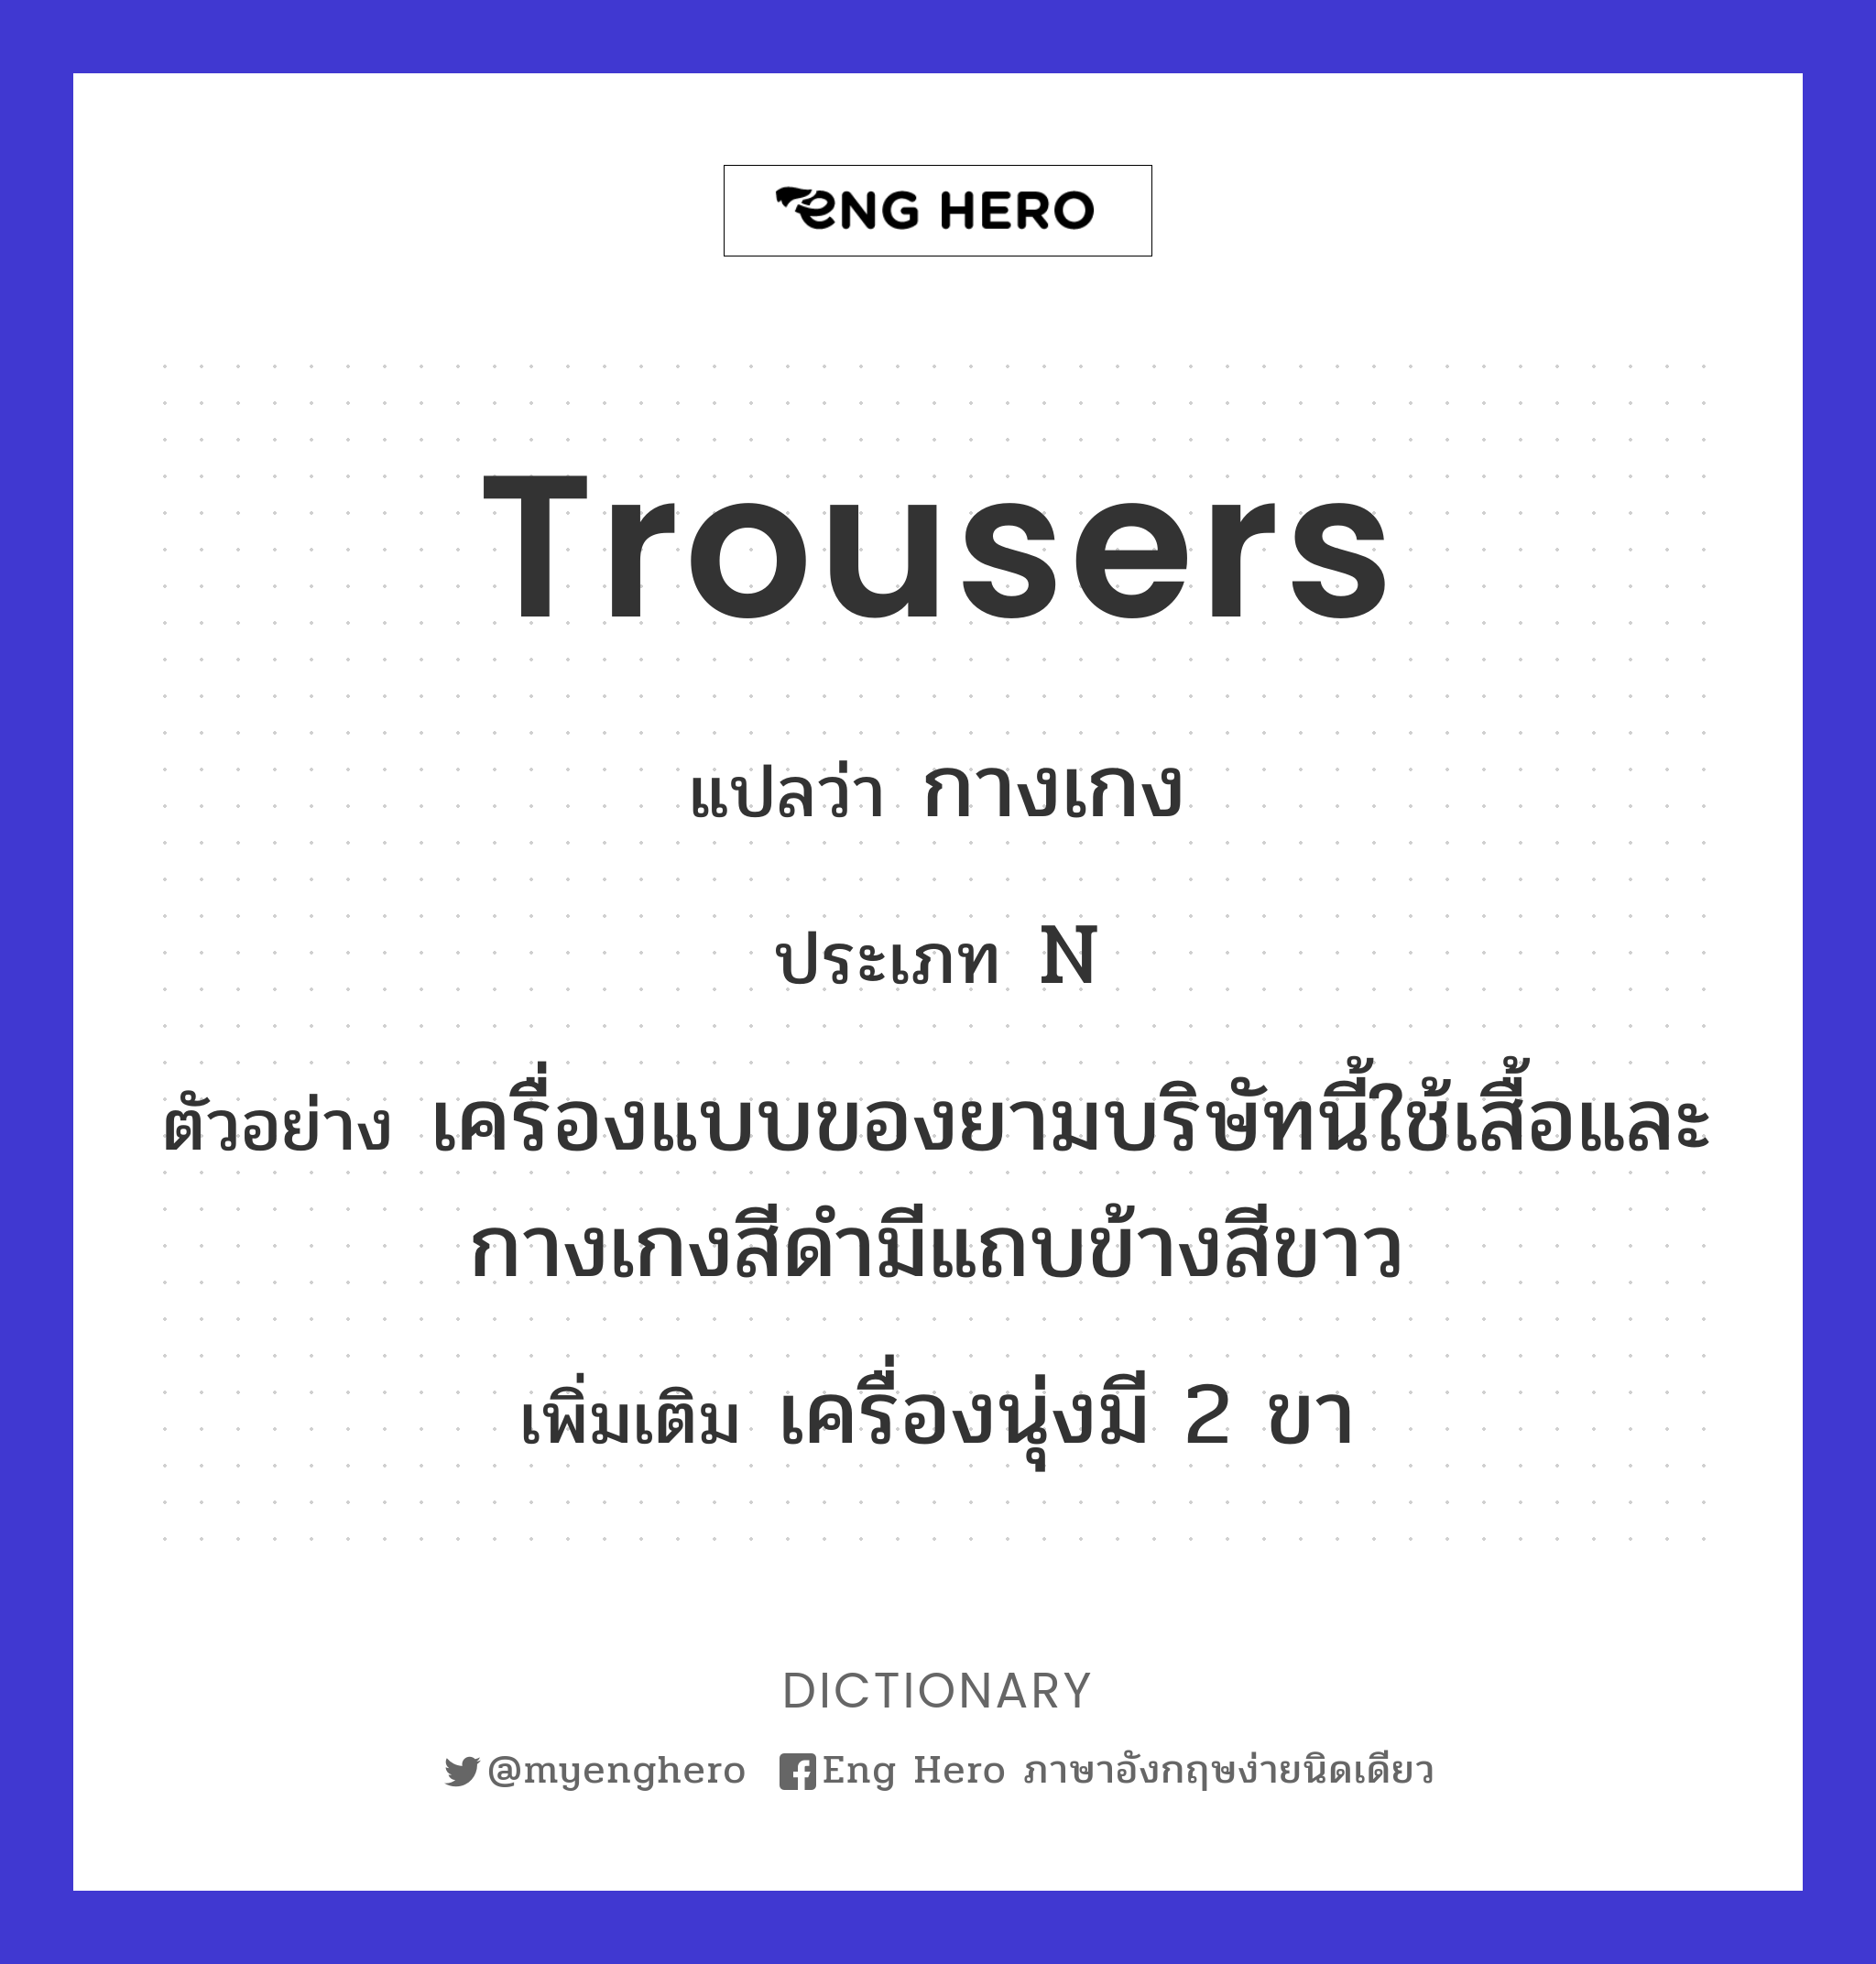 trousers